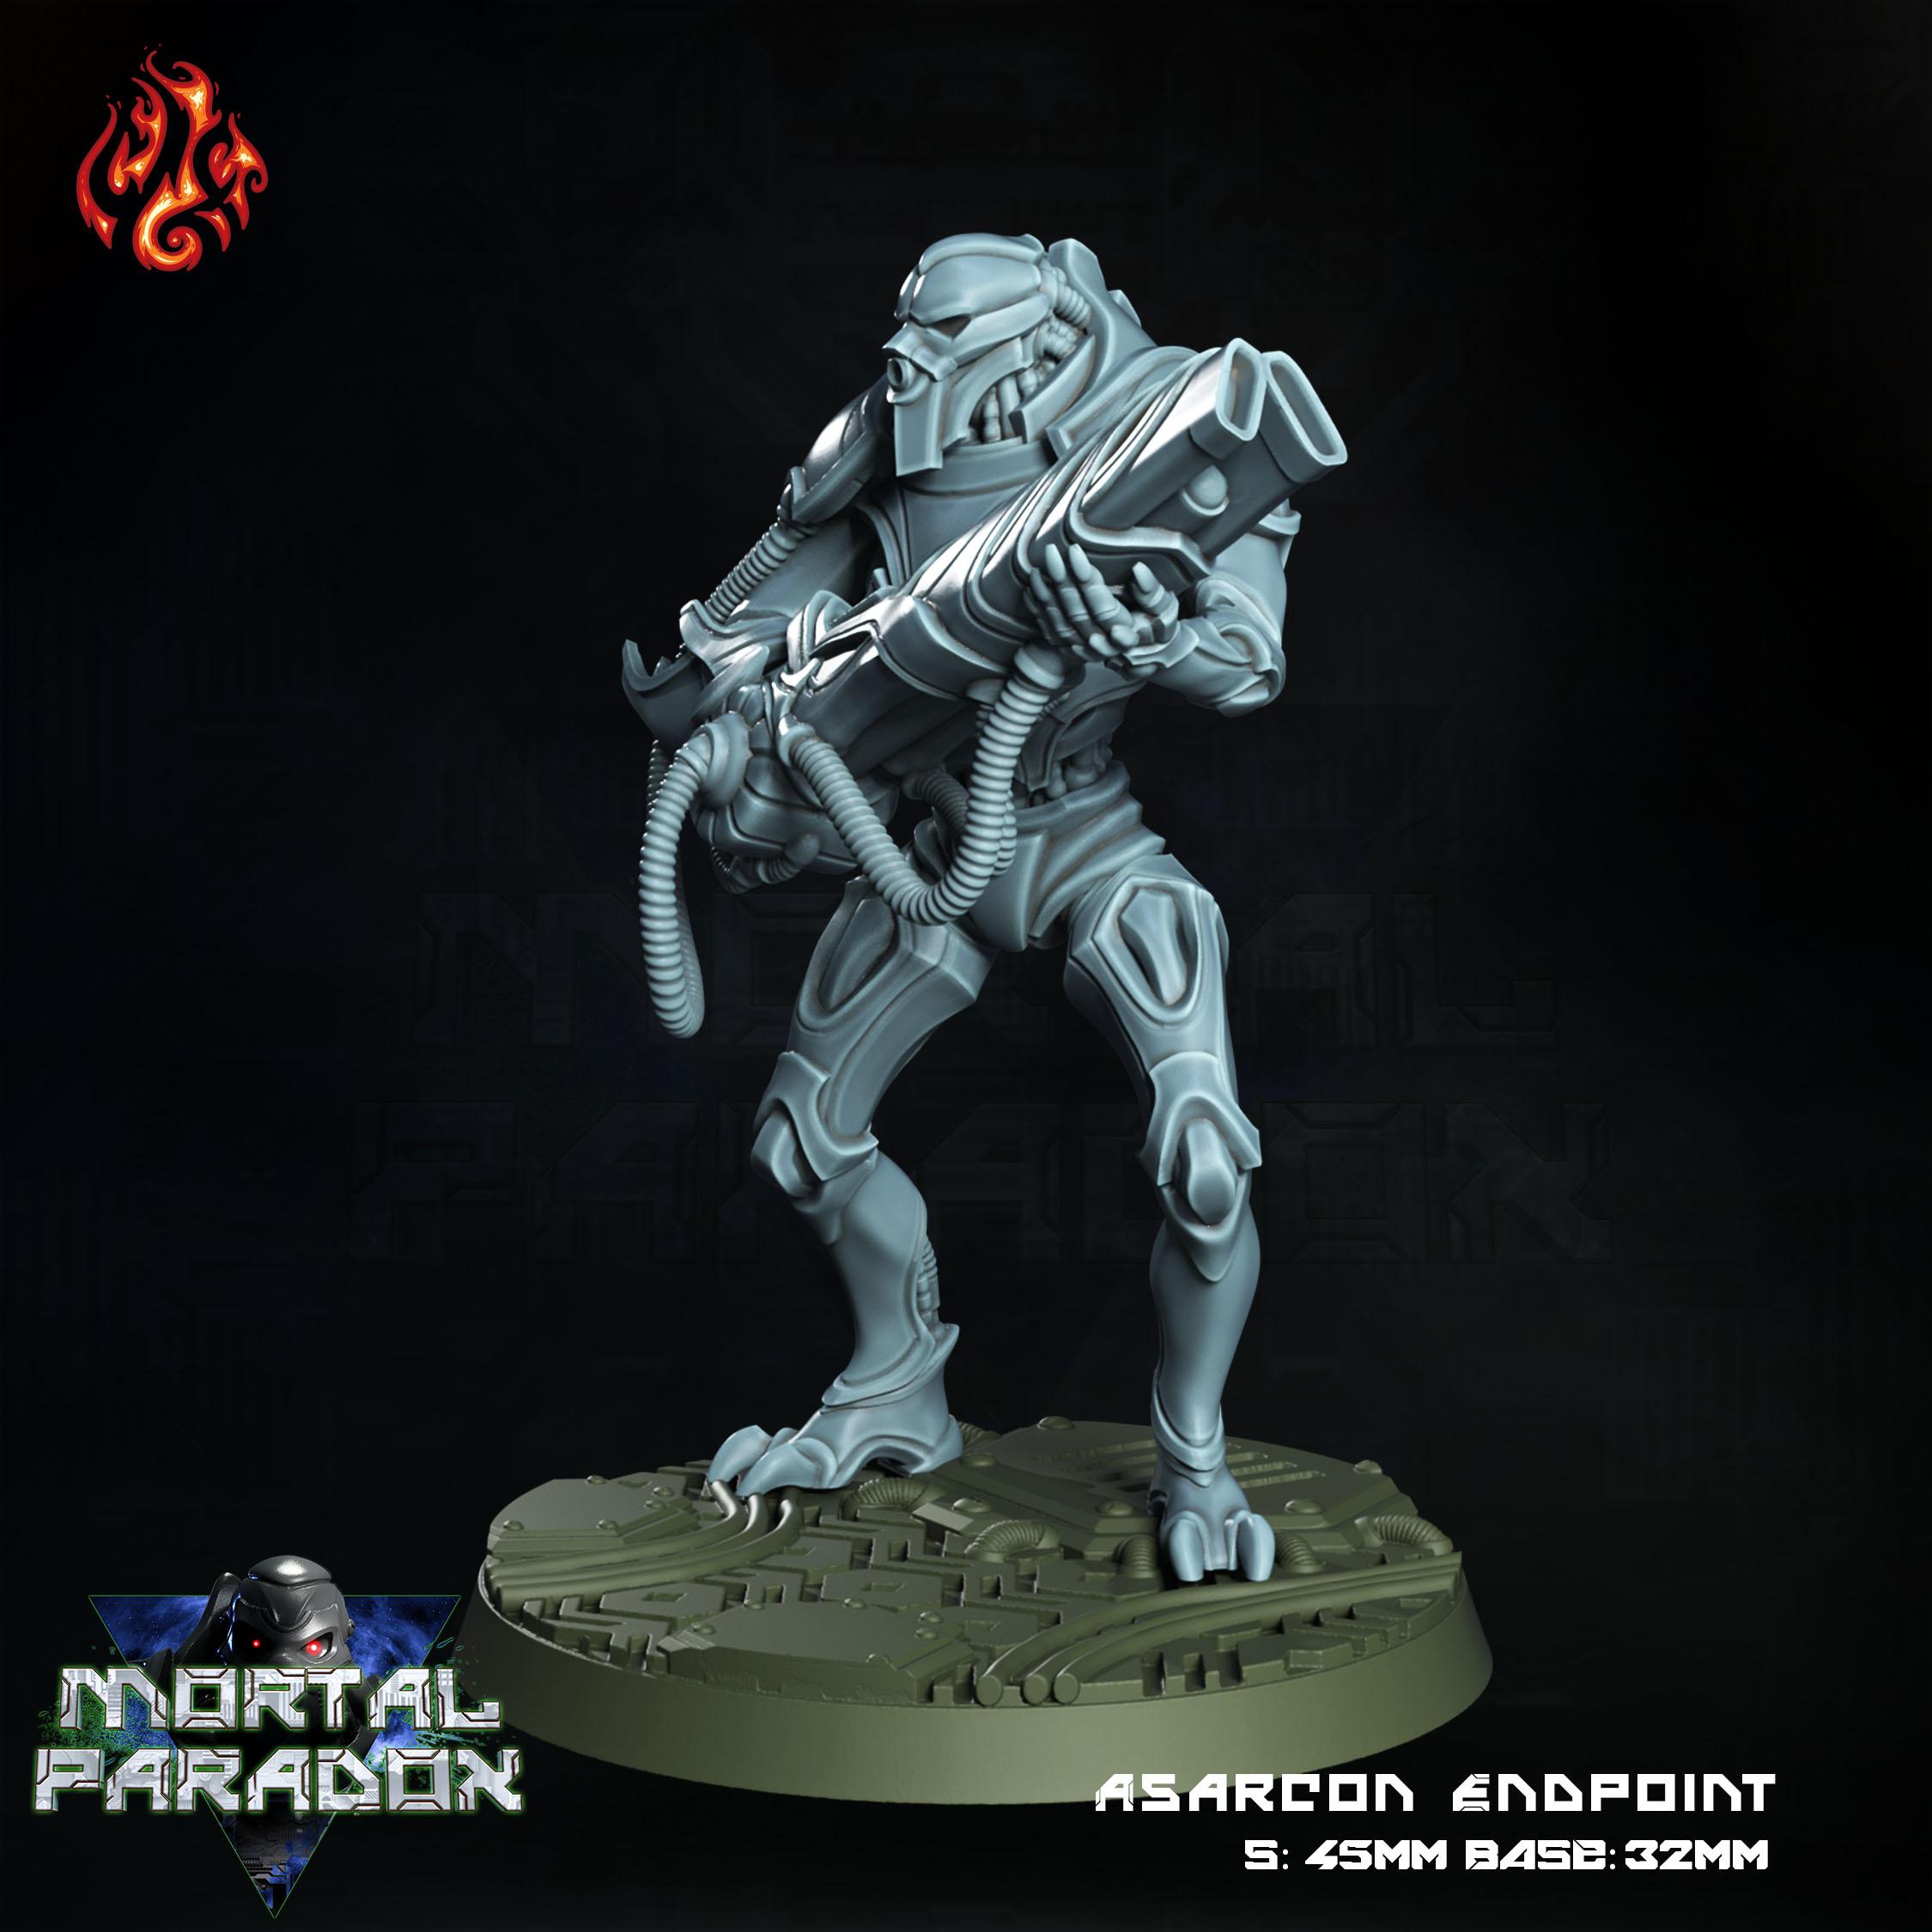 Asarcon Endpoint 3d model